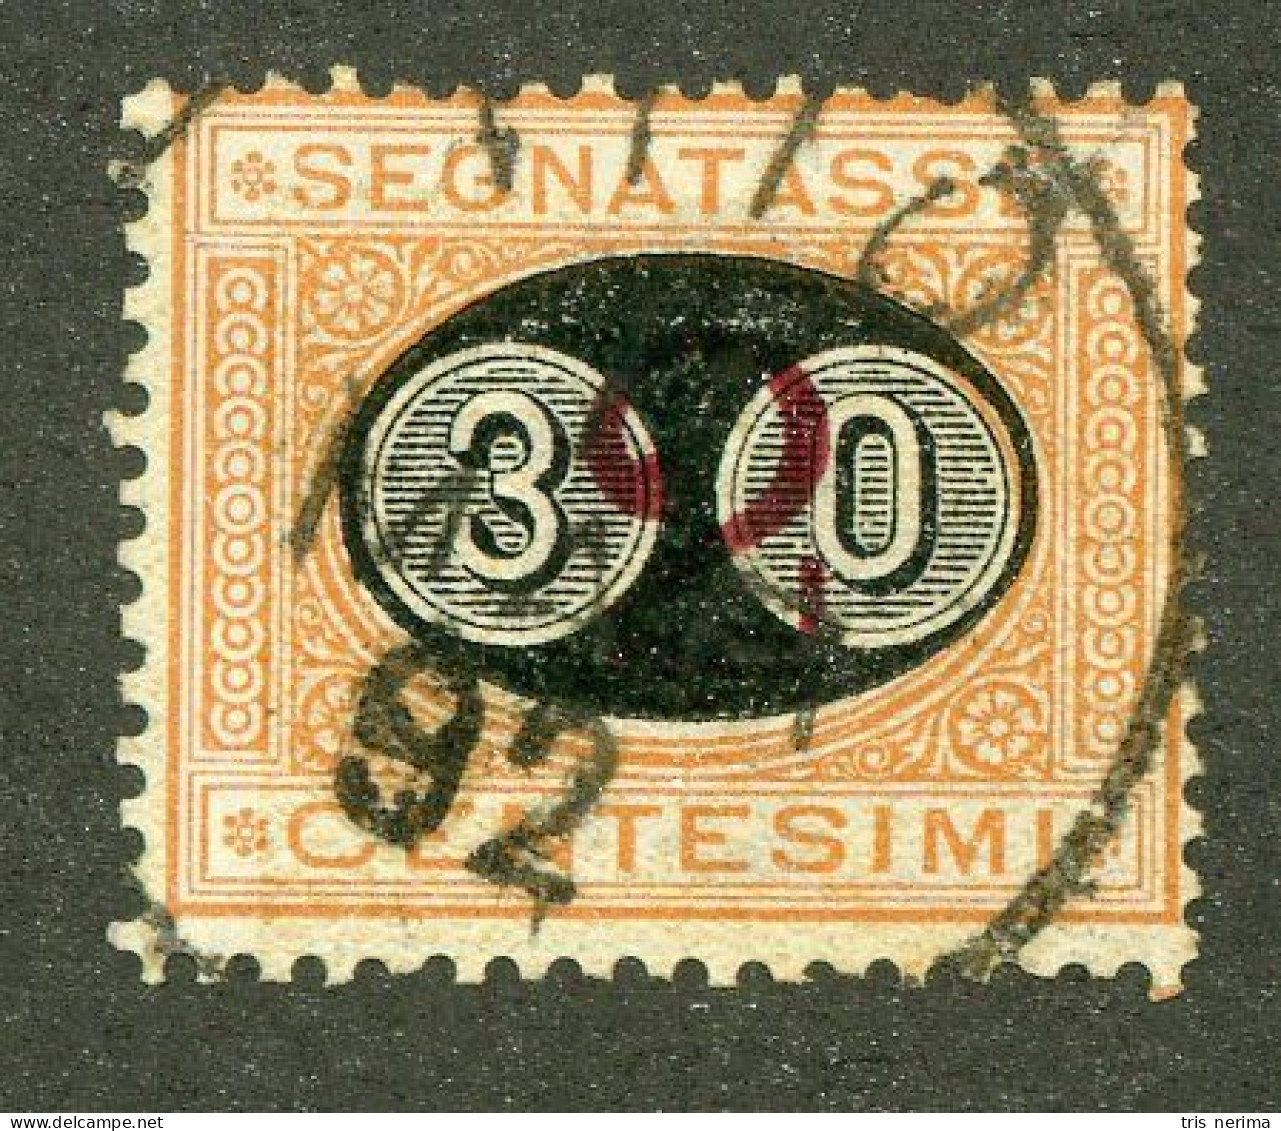 585 Italy 1890 Scott #J27 Used (Lower Bids 20% Off) - Postage Due